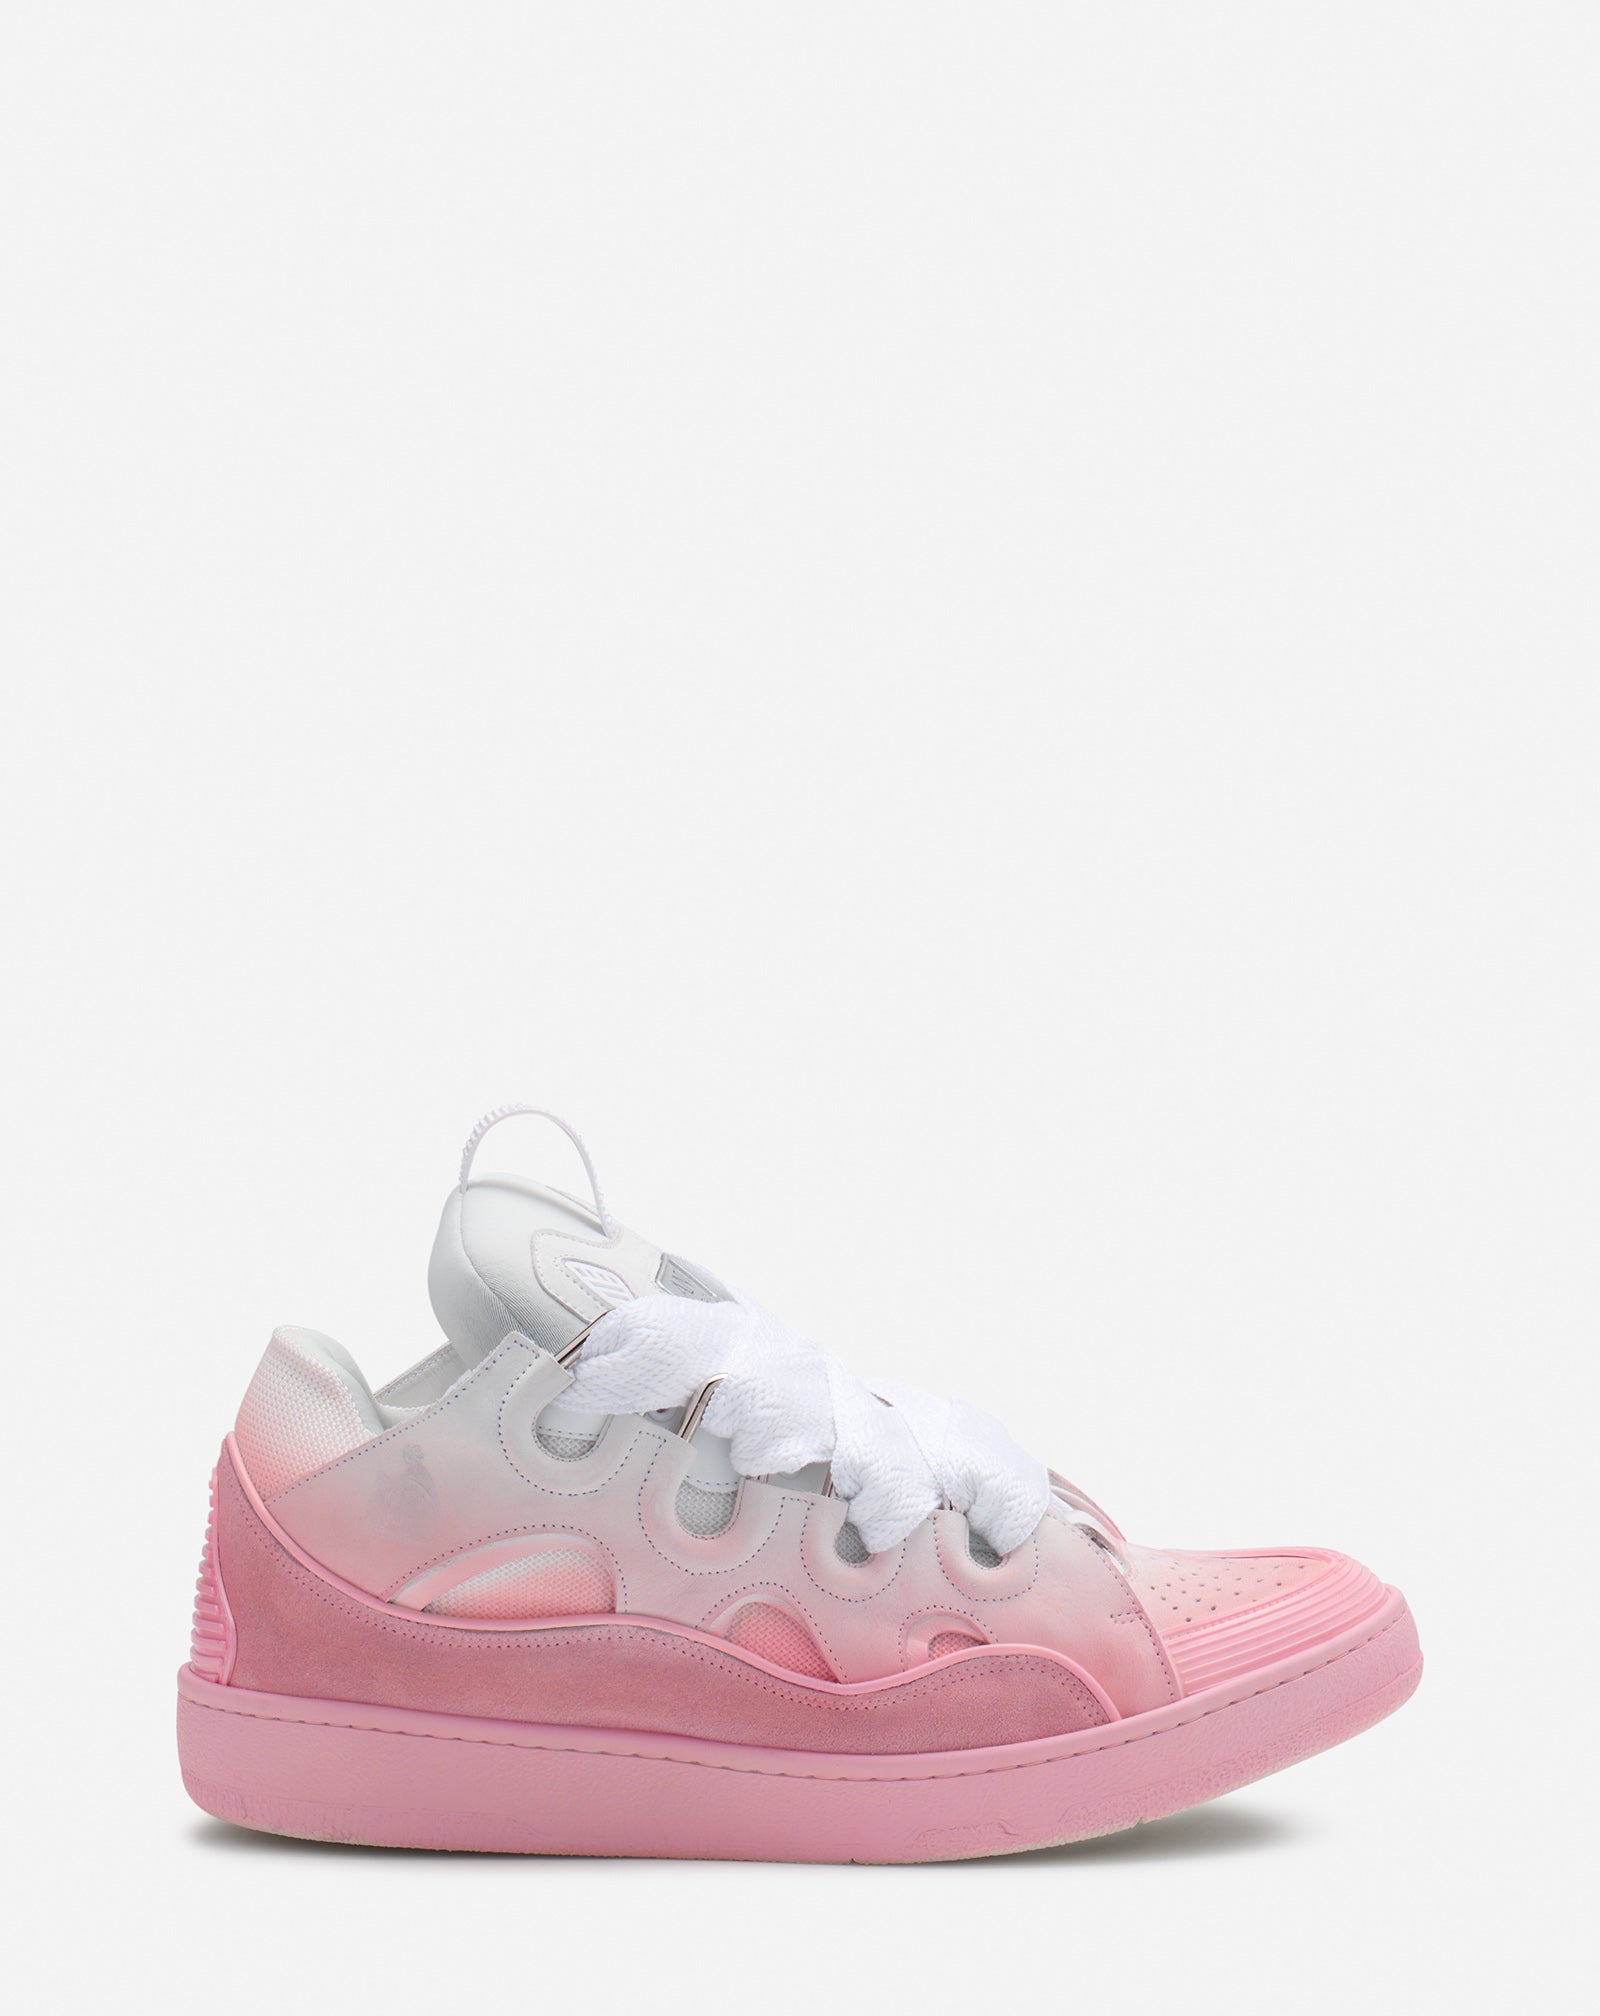 LEATHER CURB SNEAKERS, PINK/WHITE